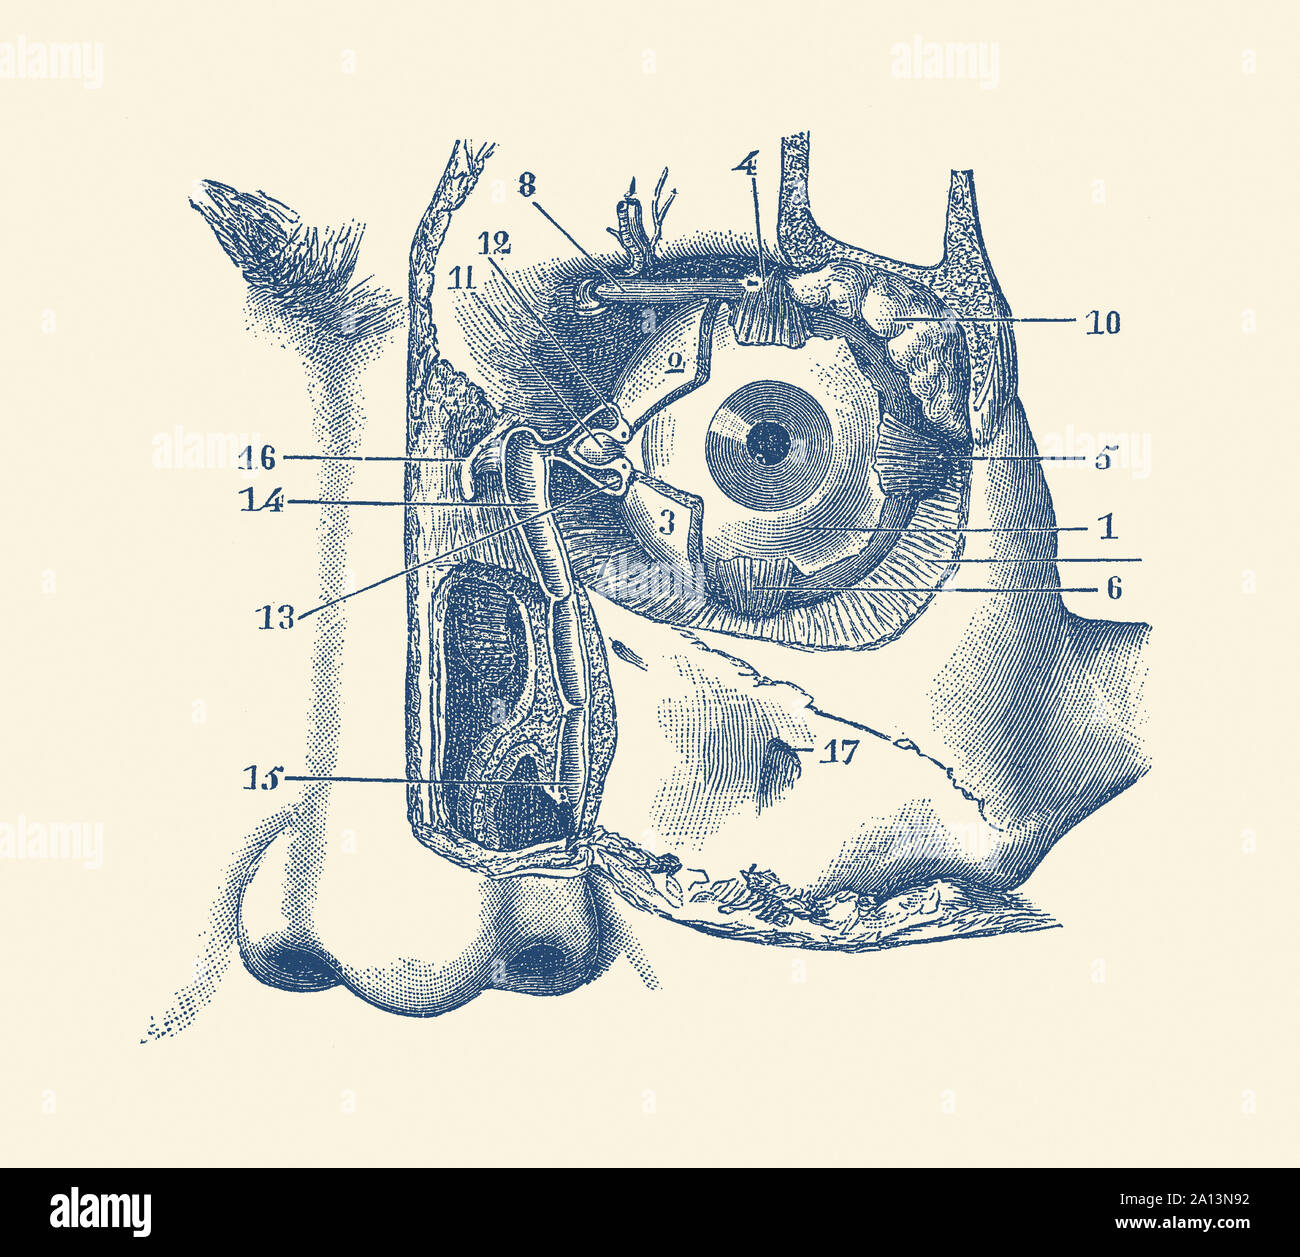 Vintage anatomy print showing a diagram of the human eye and tear duct. Stock Photo